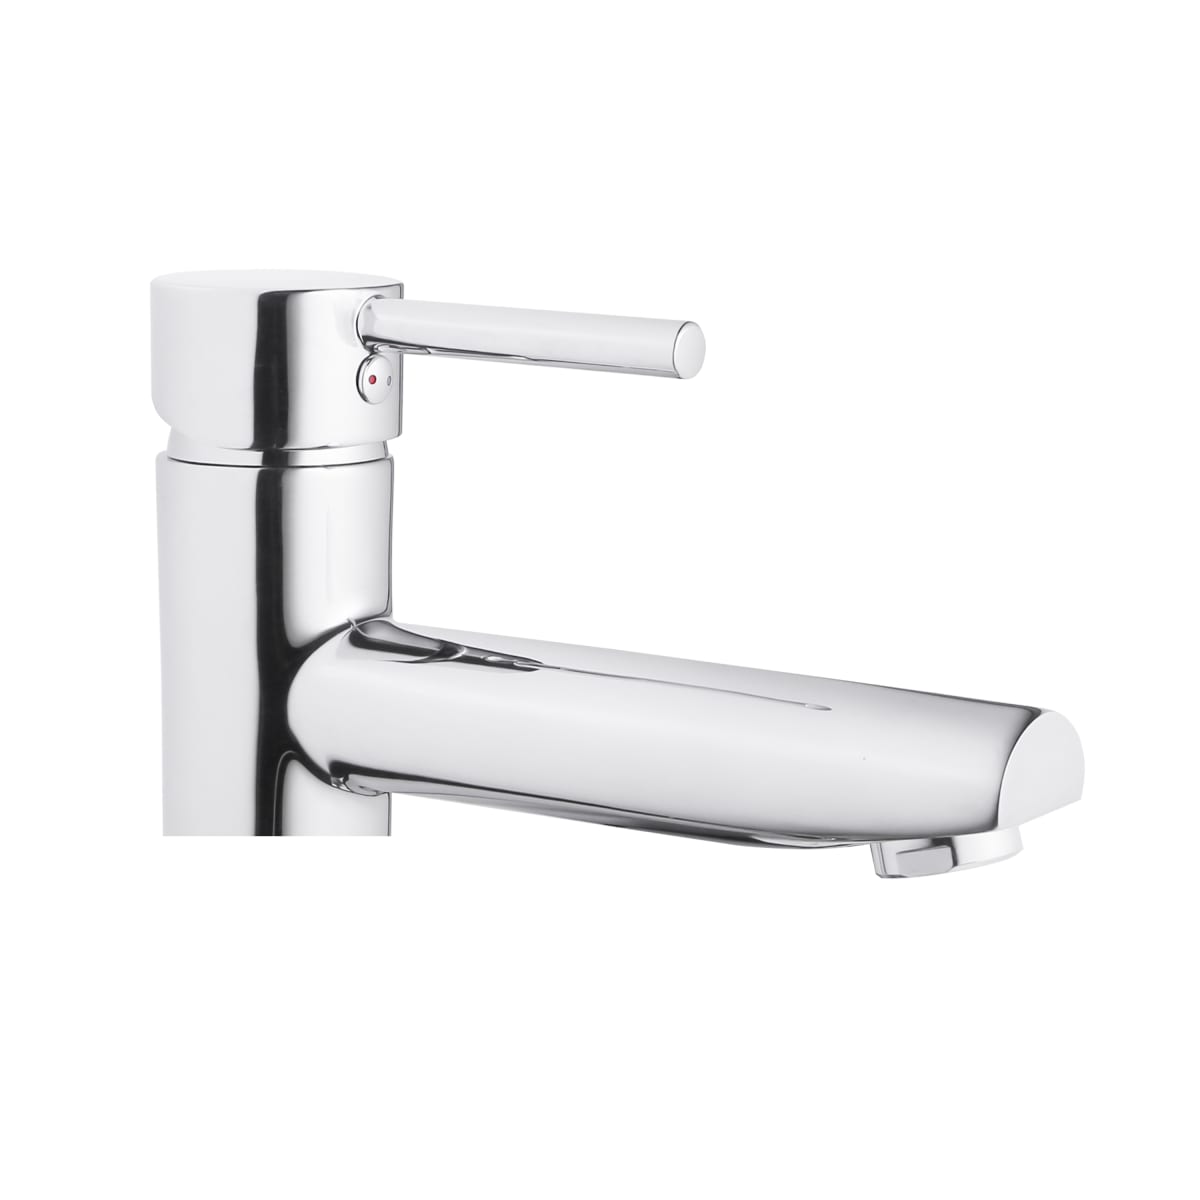 HILO HIGH BASIN MIXER WITHOUT WASTE